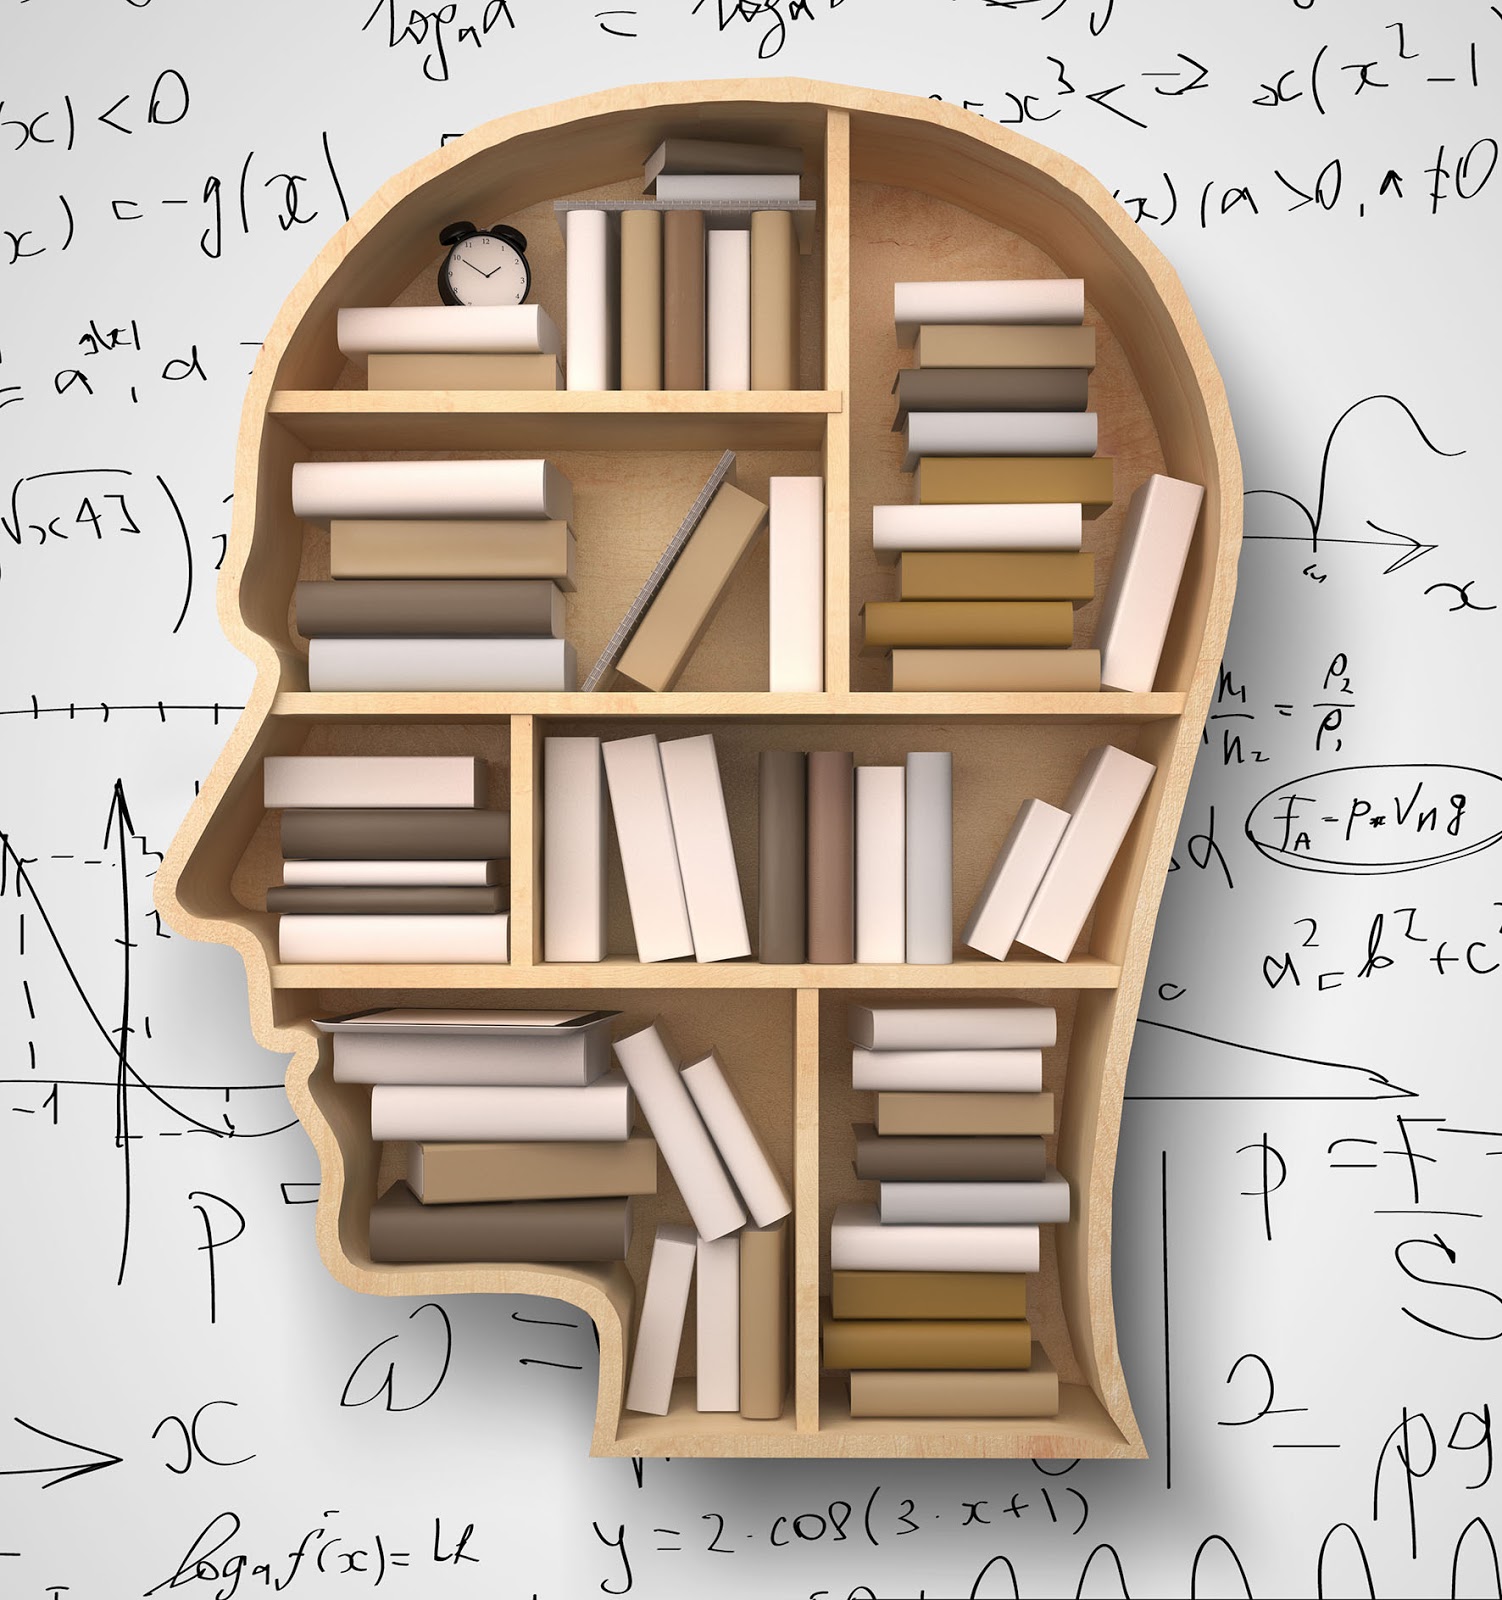 Understanding how the brain processes maths learning